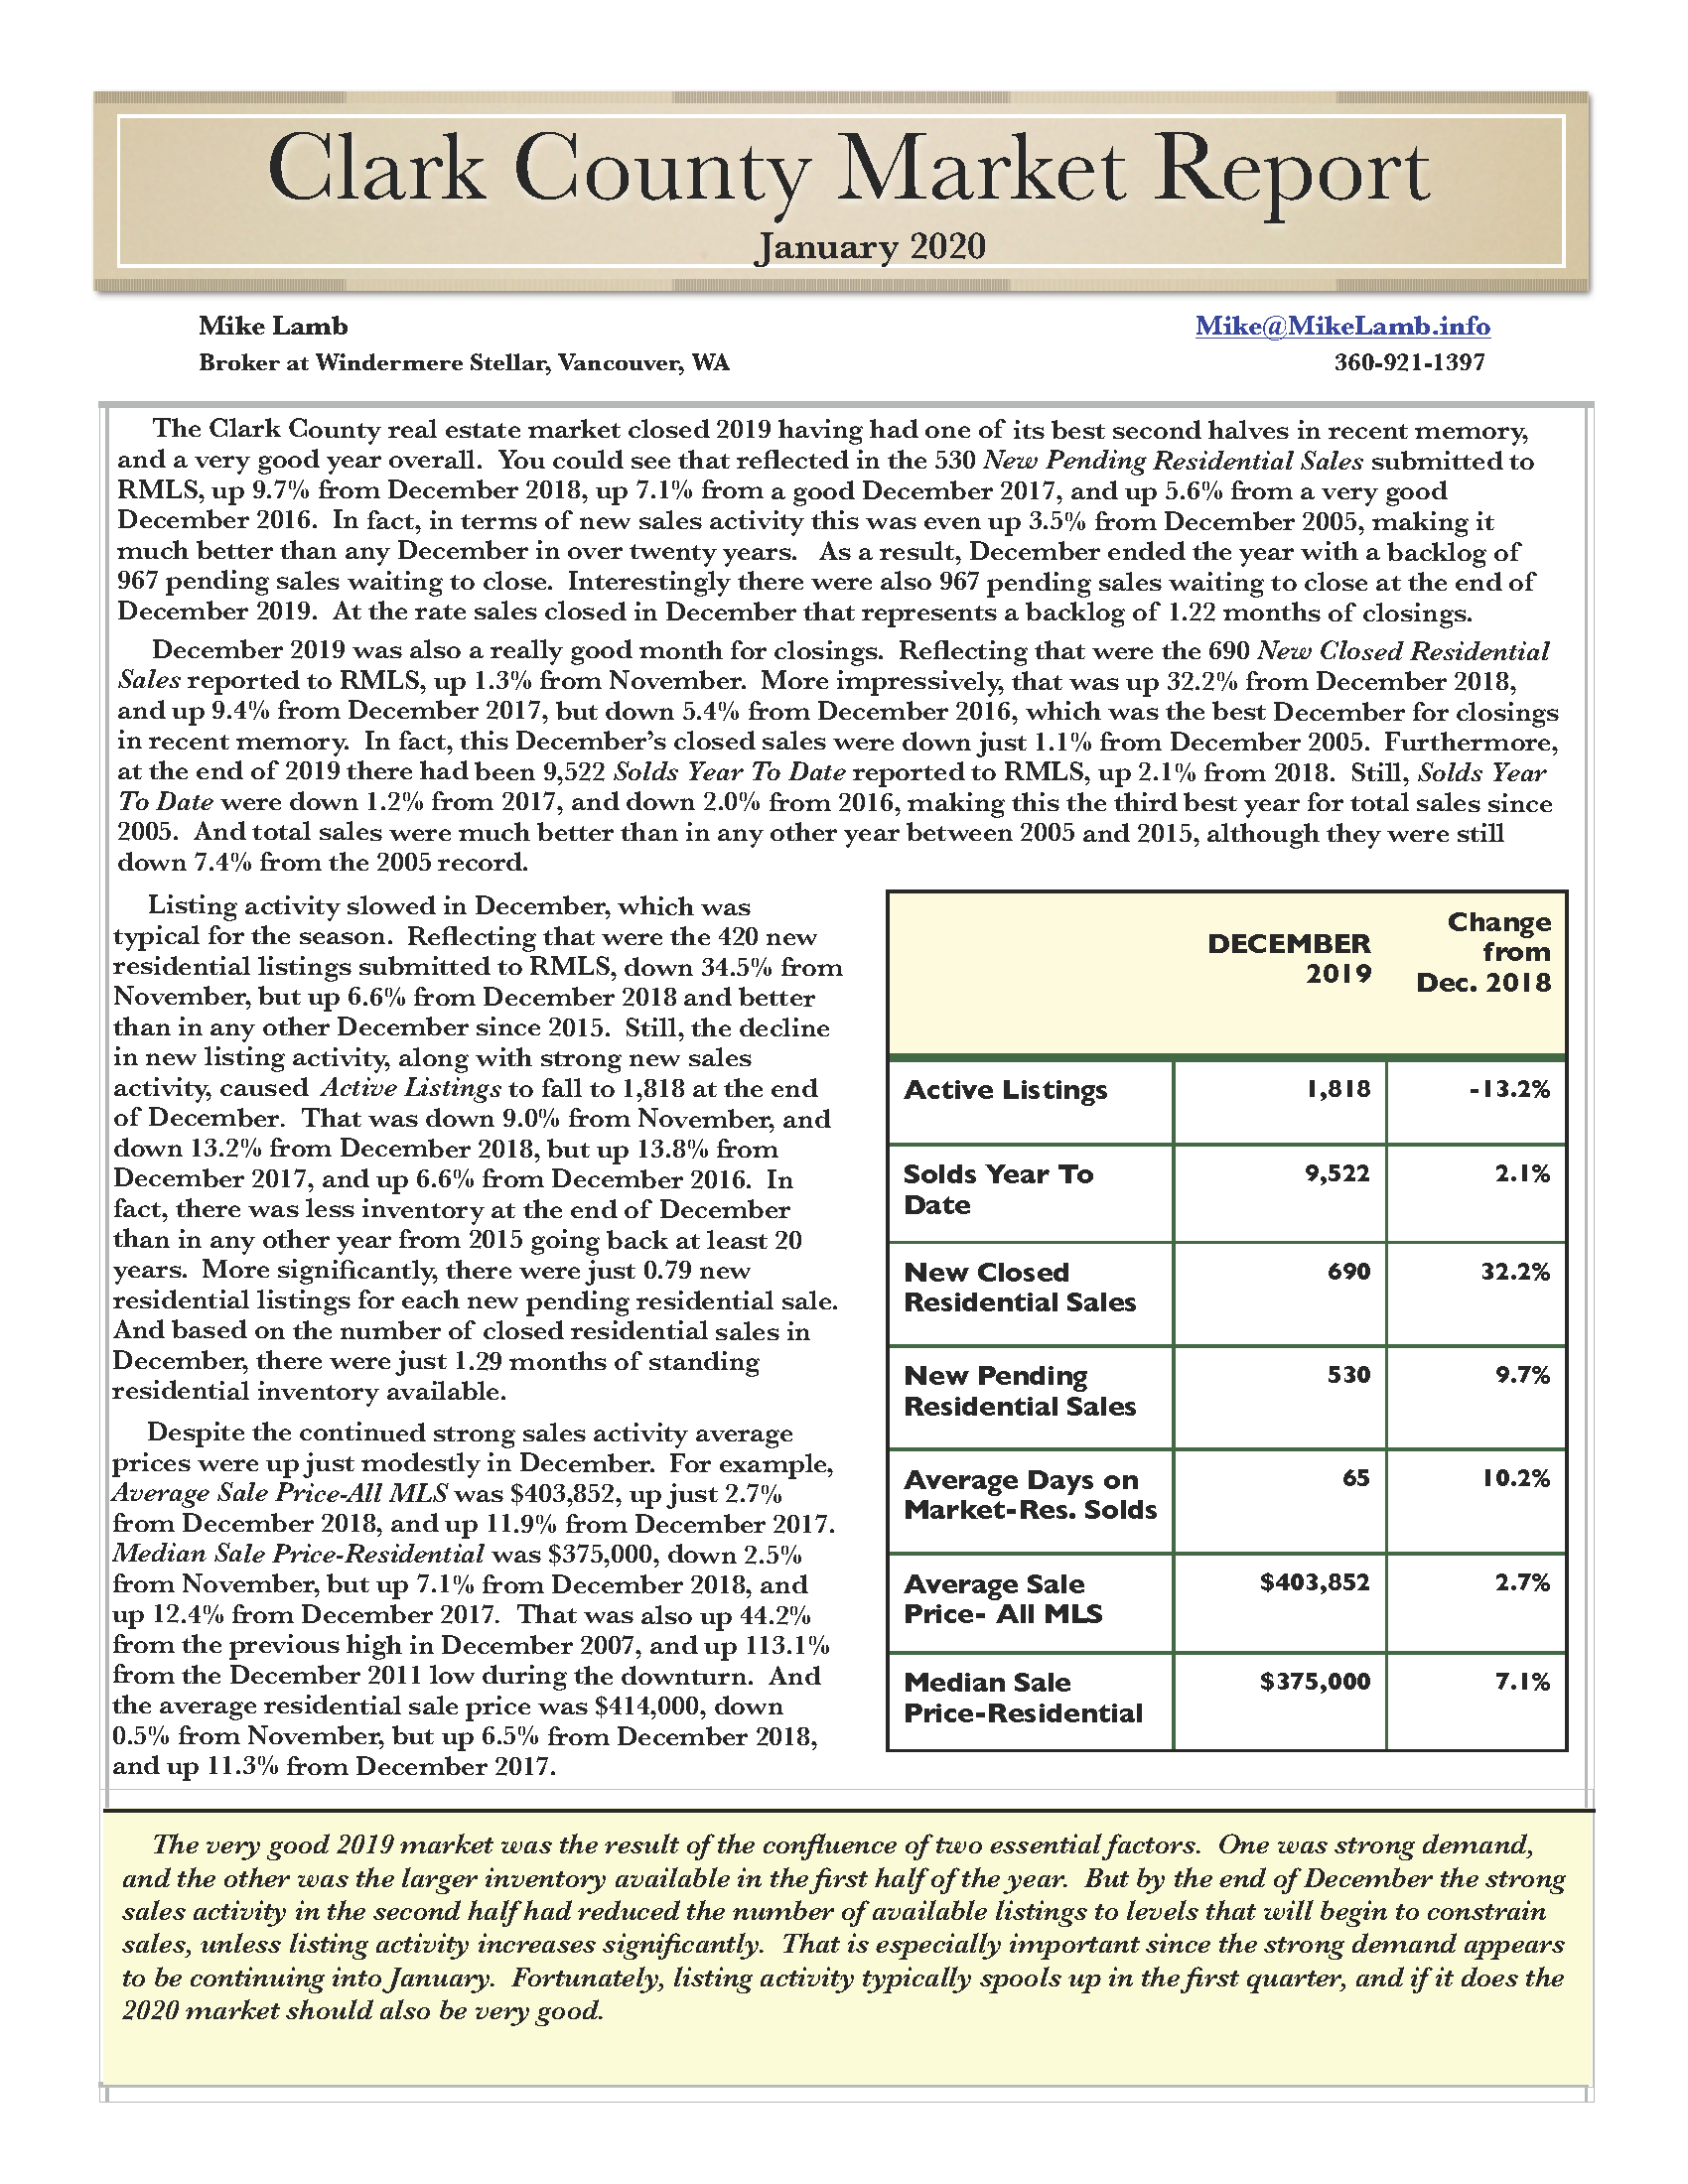 January 2020 Clark County Market Report by Mike Lamb